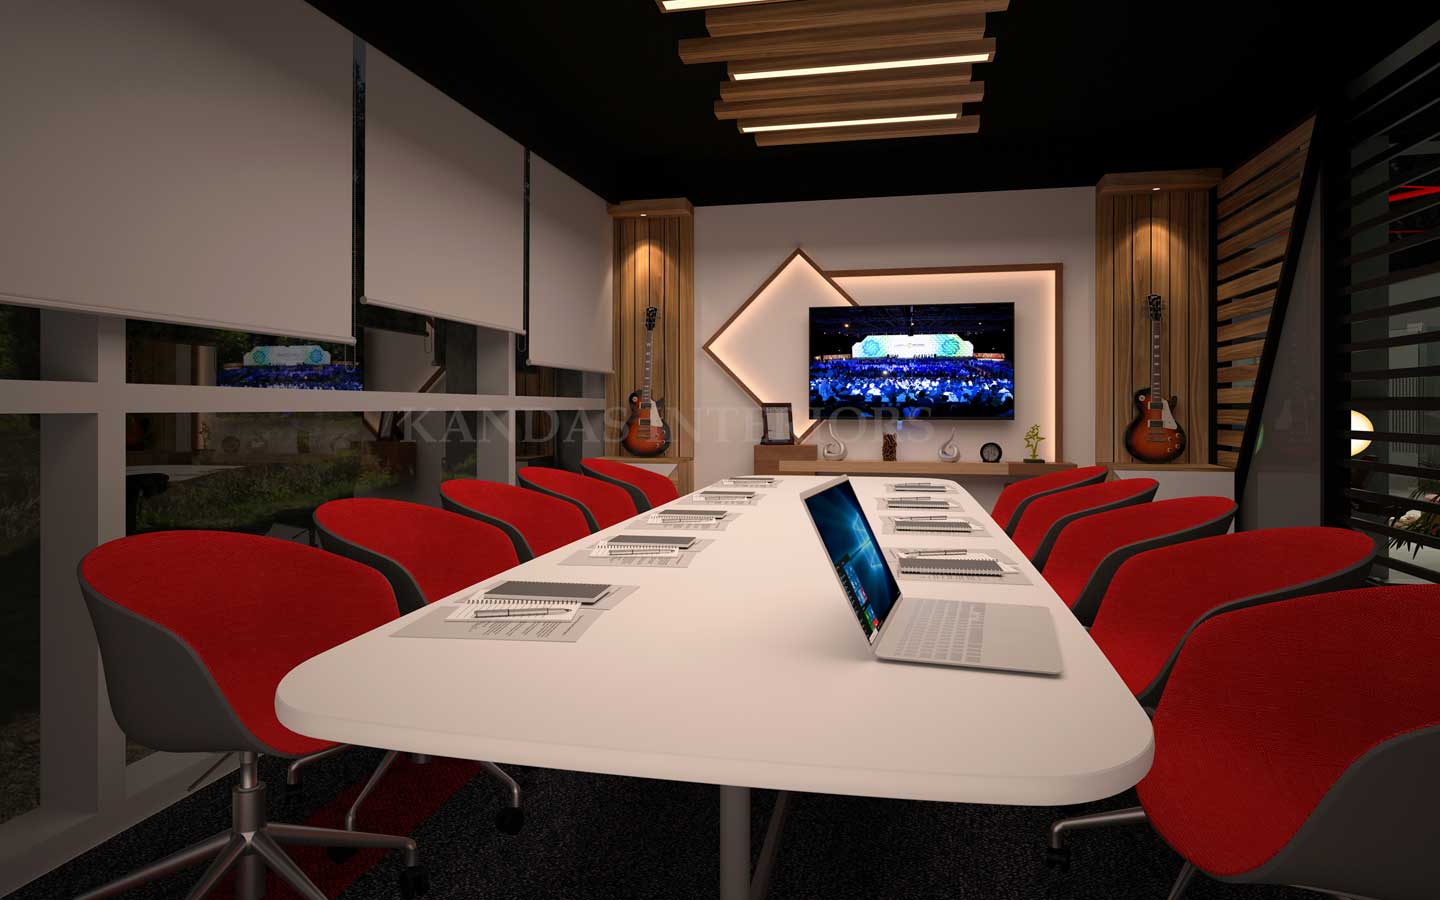 Dome Events office interior fit out by kandas the leading interior designing firm in dubai- office interior designs